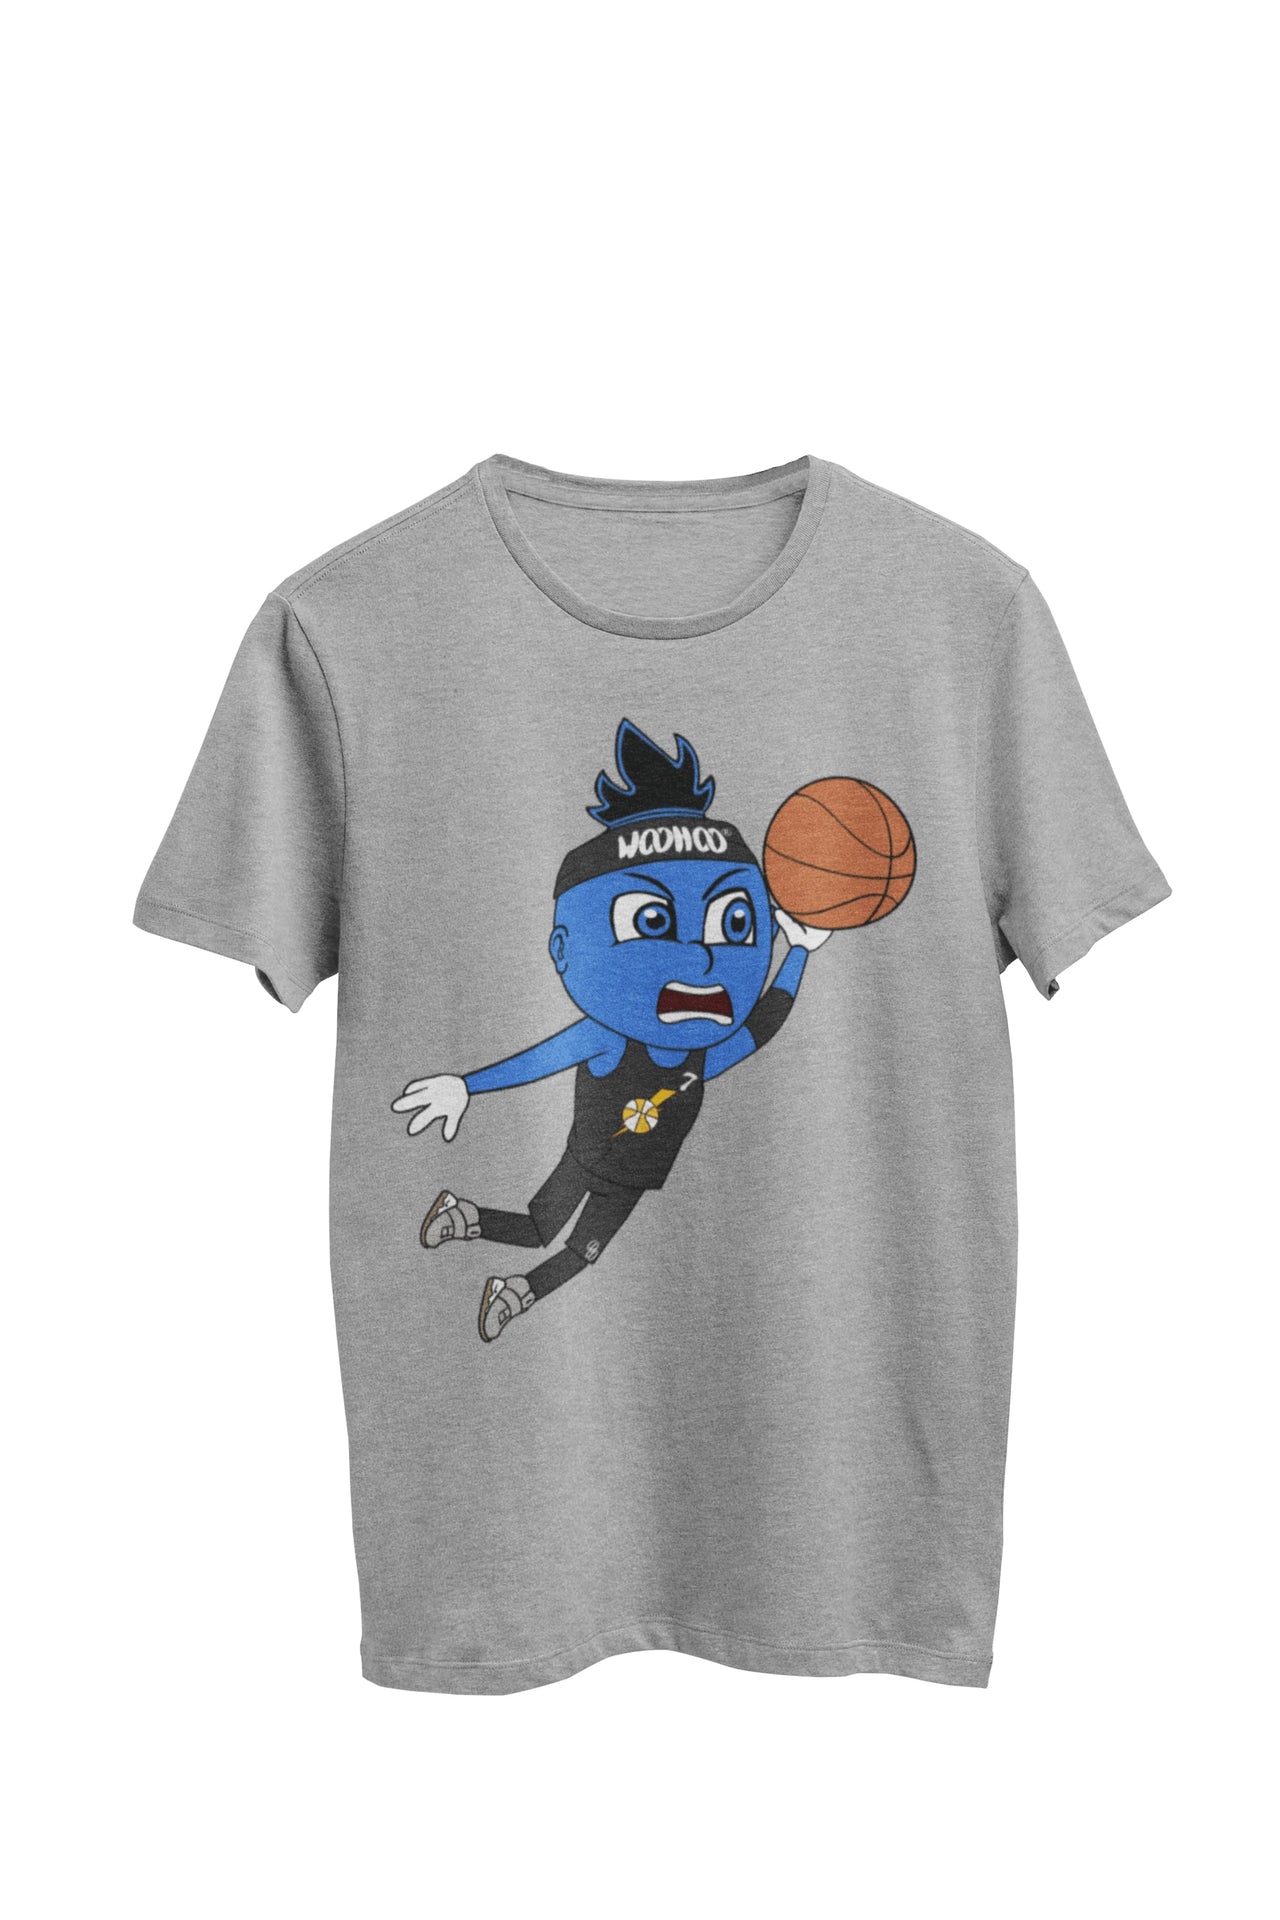 WooHooBerry executing an impressive slam dunk in mid-air while donning a black basketball uniform, on a gray T-shirt, and a sweatband featuring the text 'WooHoo.' A dynamic sports moment captured with enthusiasm and skill.